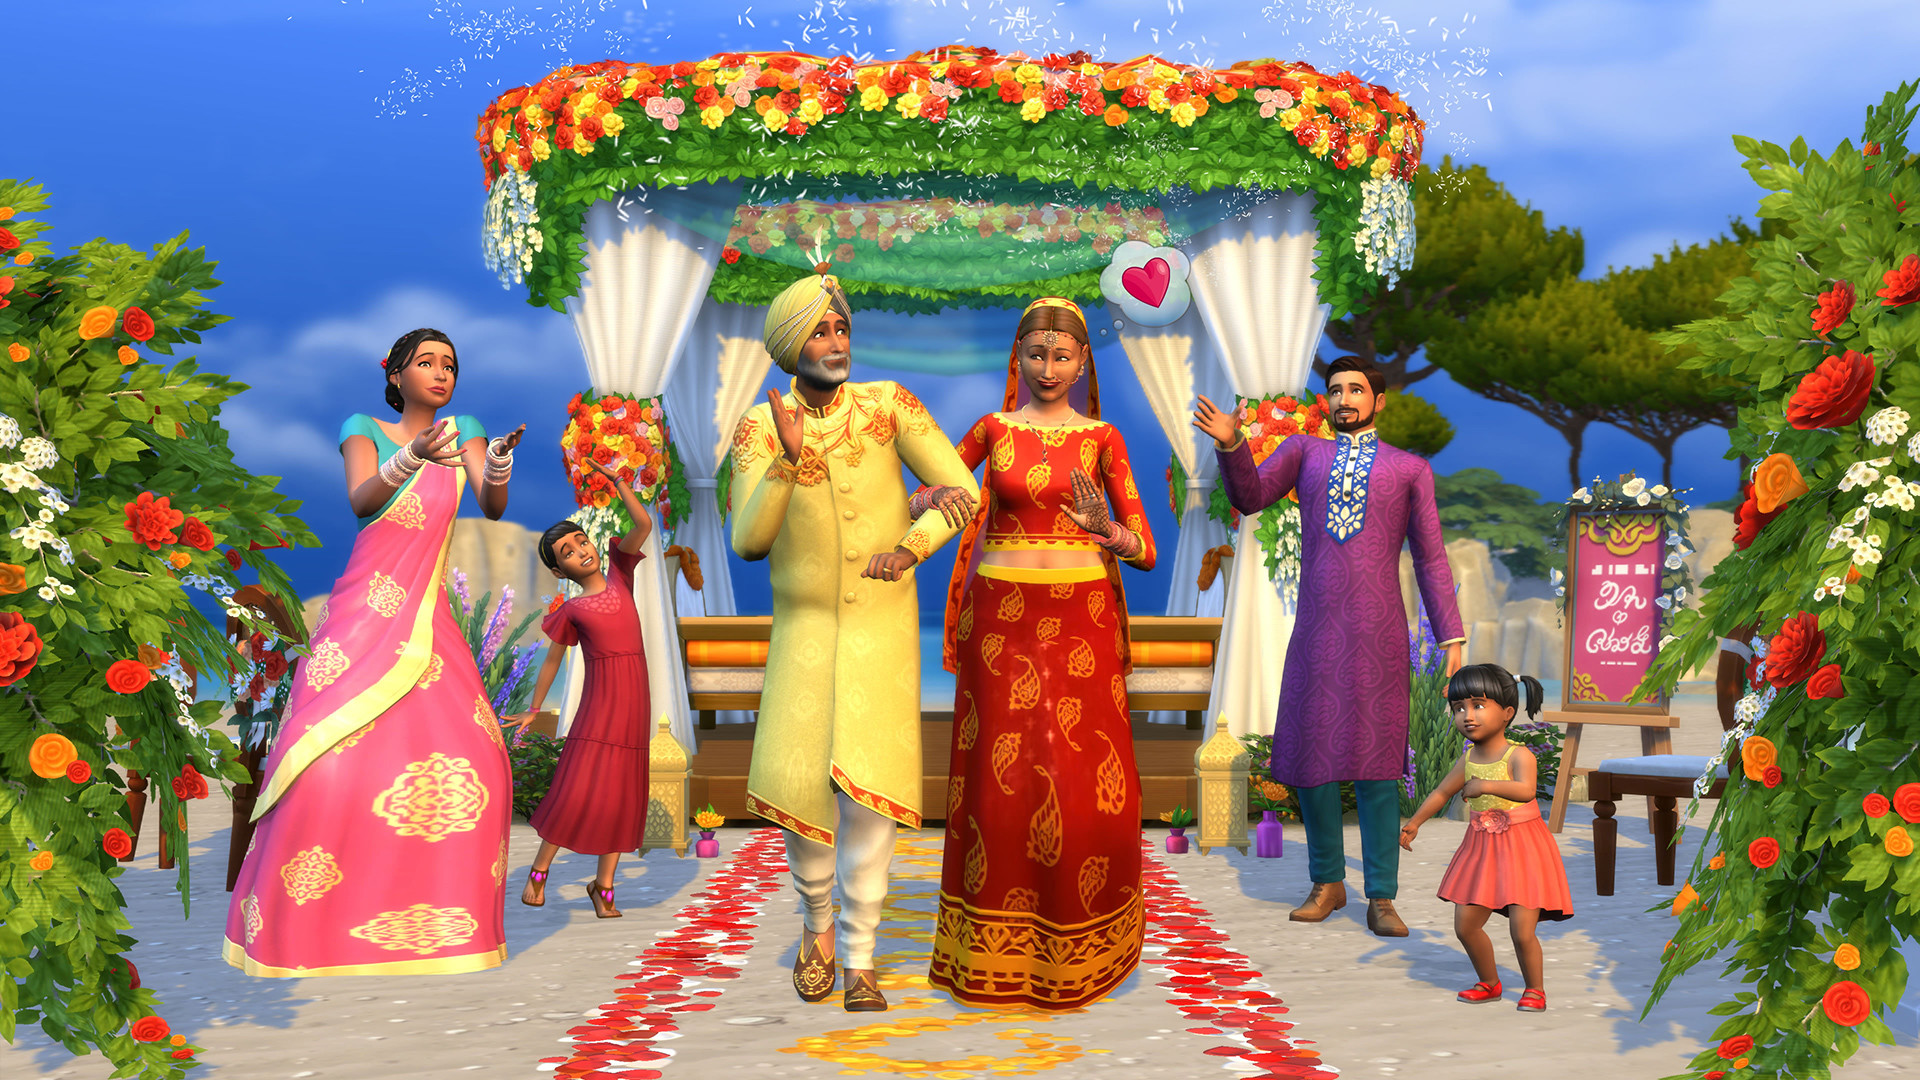 The Sims 4 - My Wedding Stories Game Pack DLC Steam Altergift